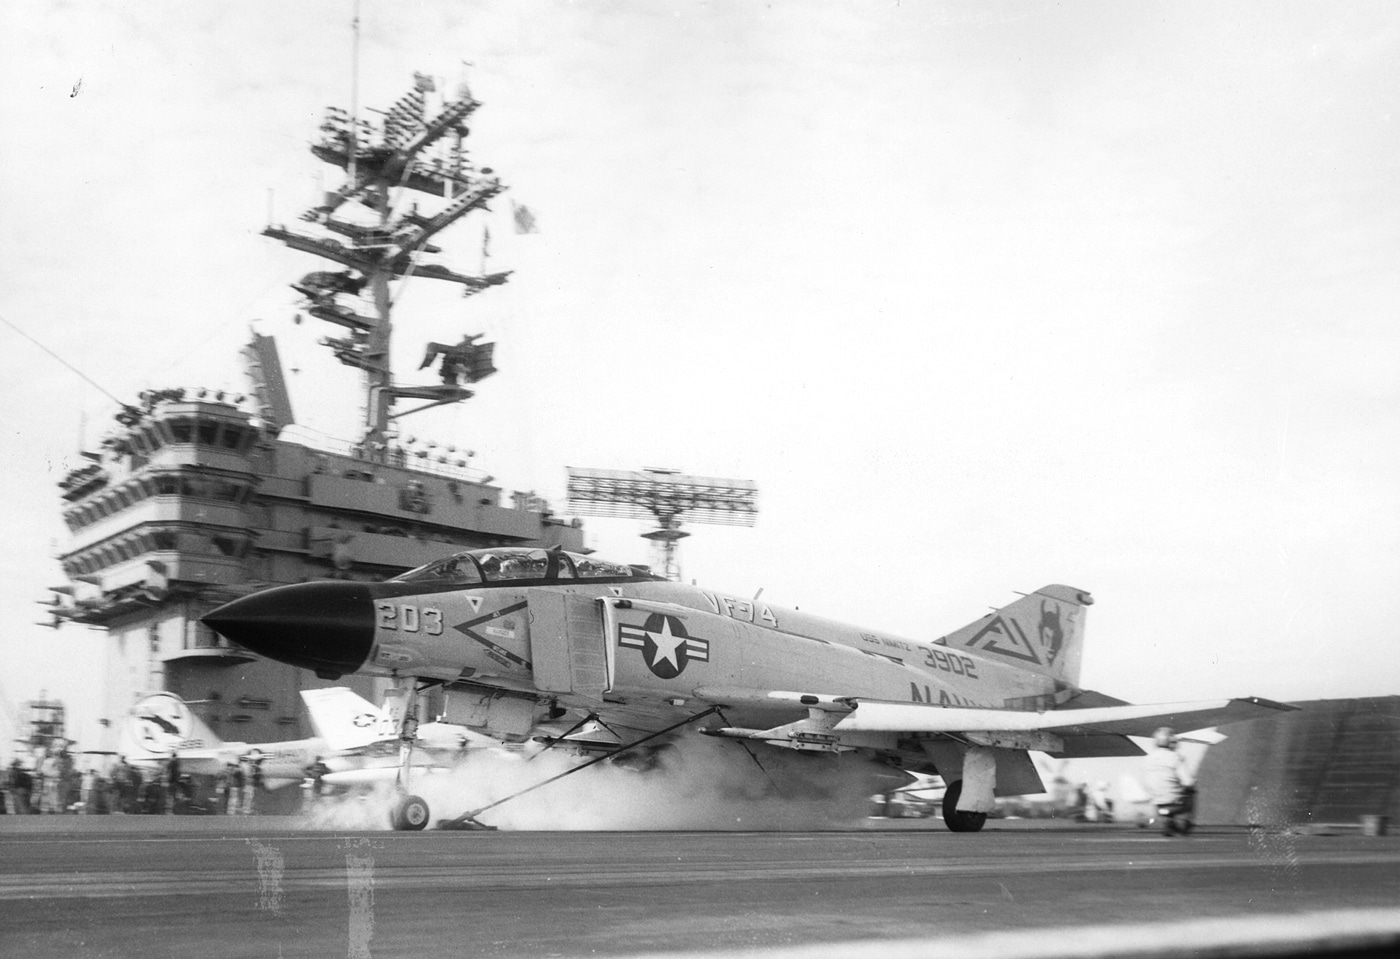 f-4j phantom ii launches from the deck of the uss nimitz